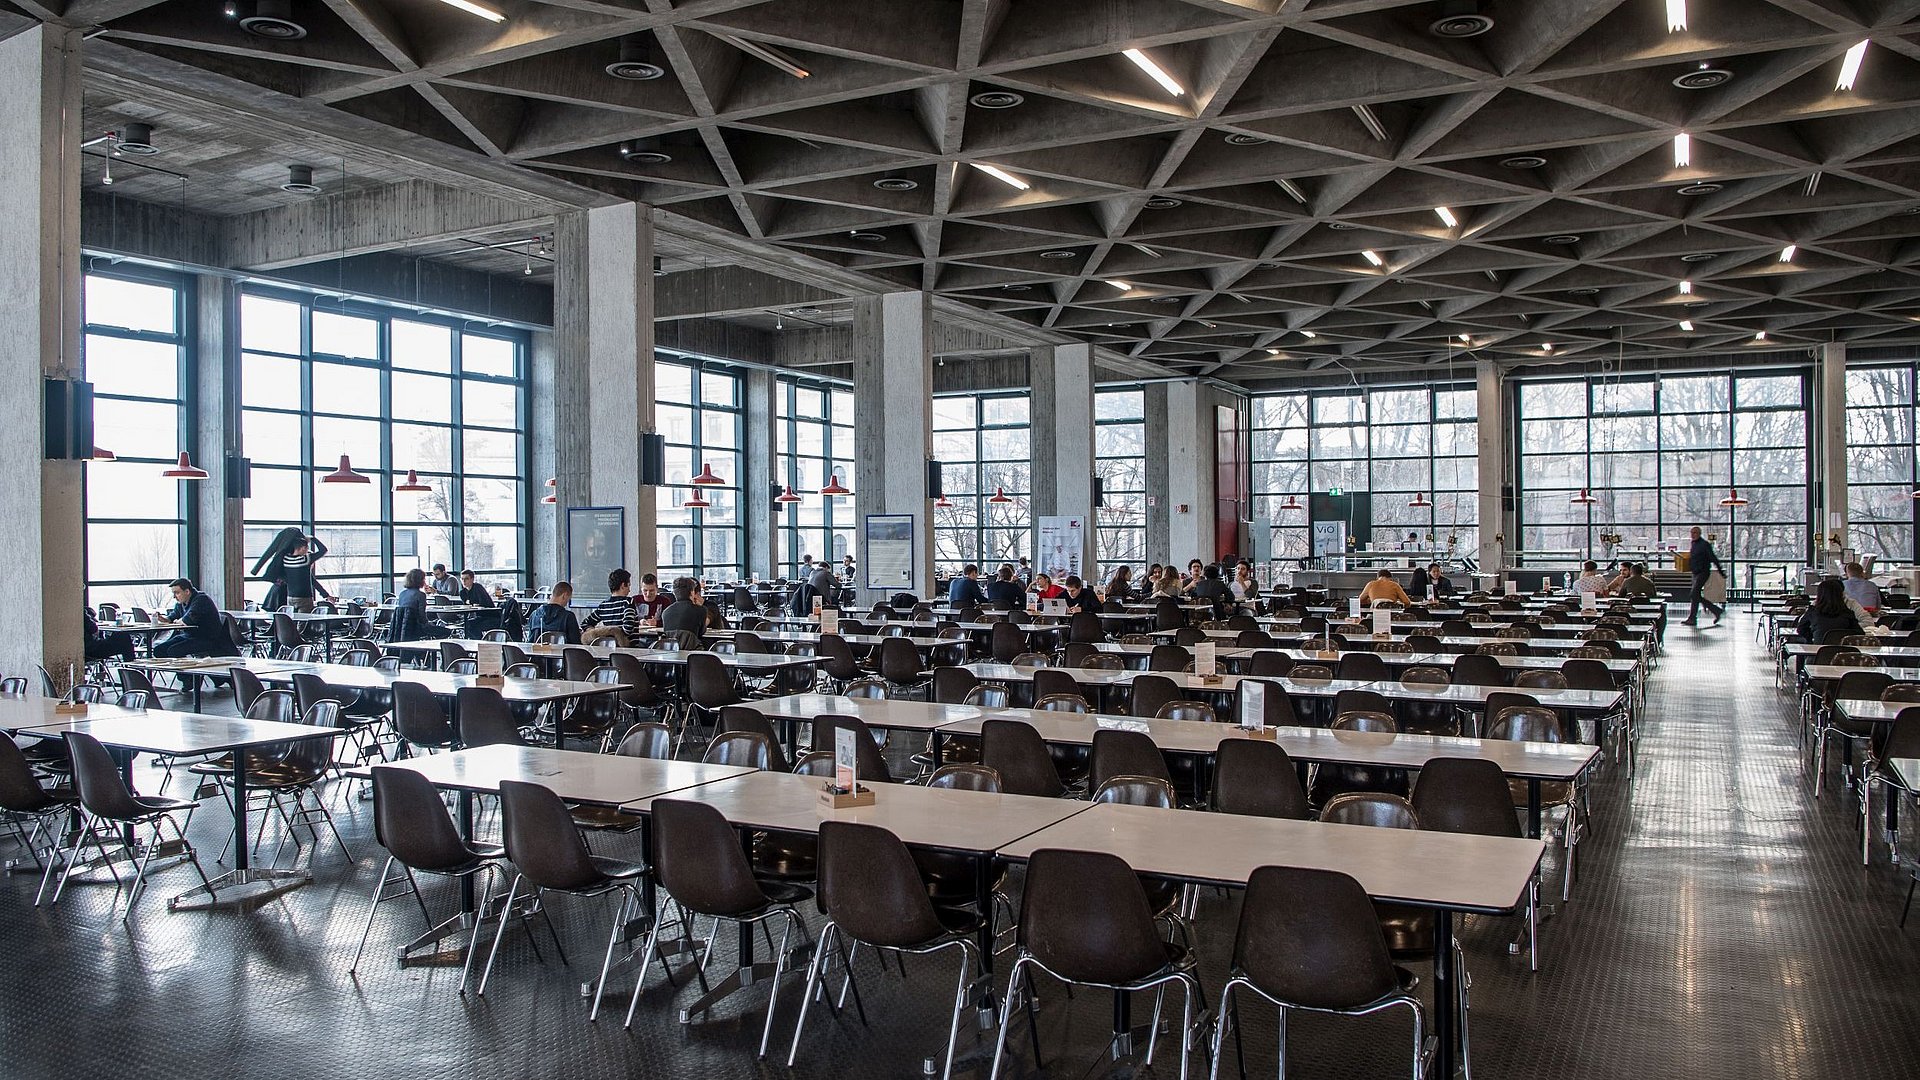 Large dining hall of the canteen in Arcisstrasse in 2018.